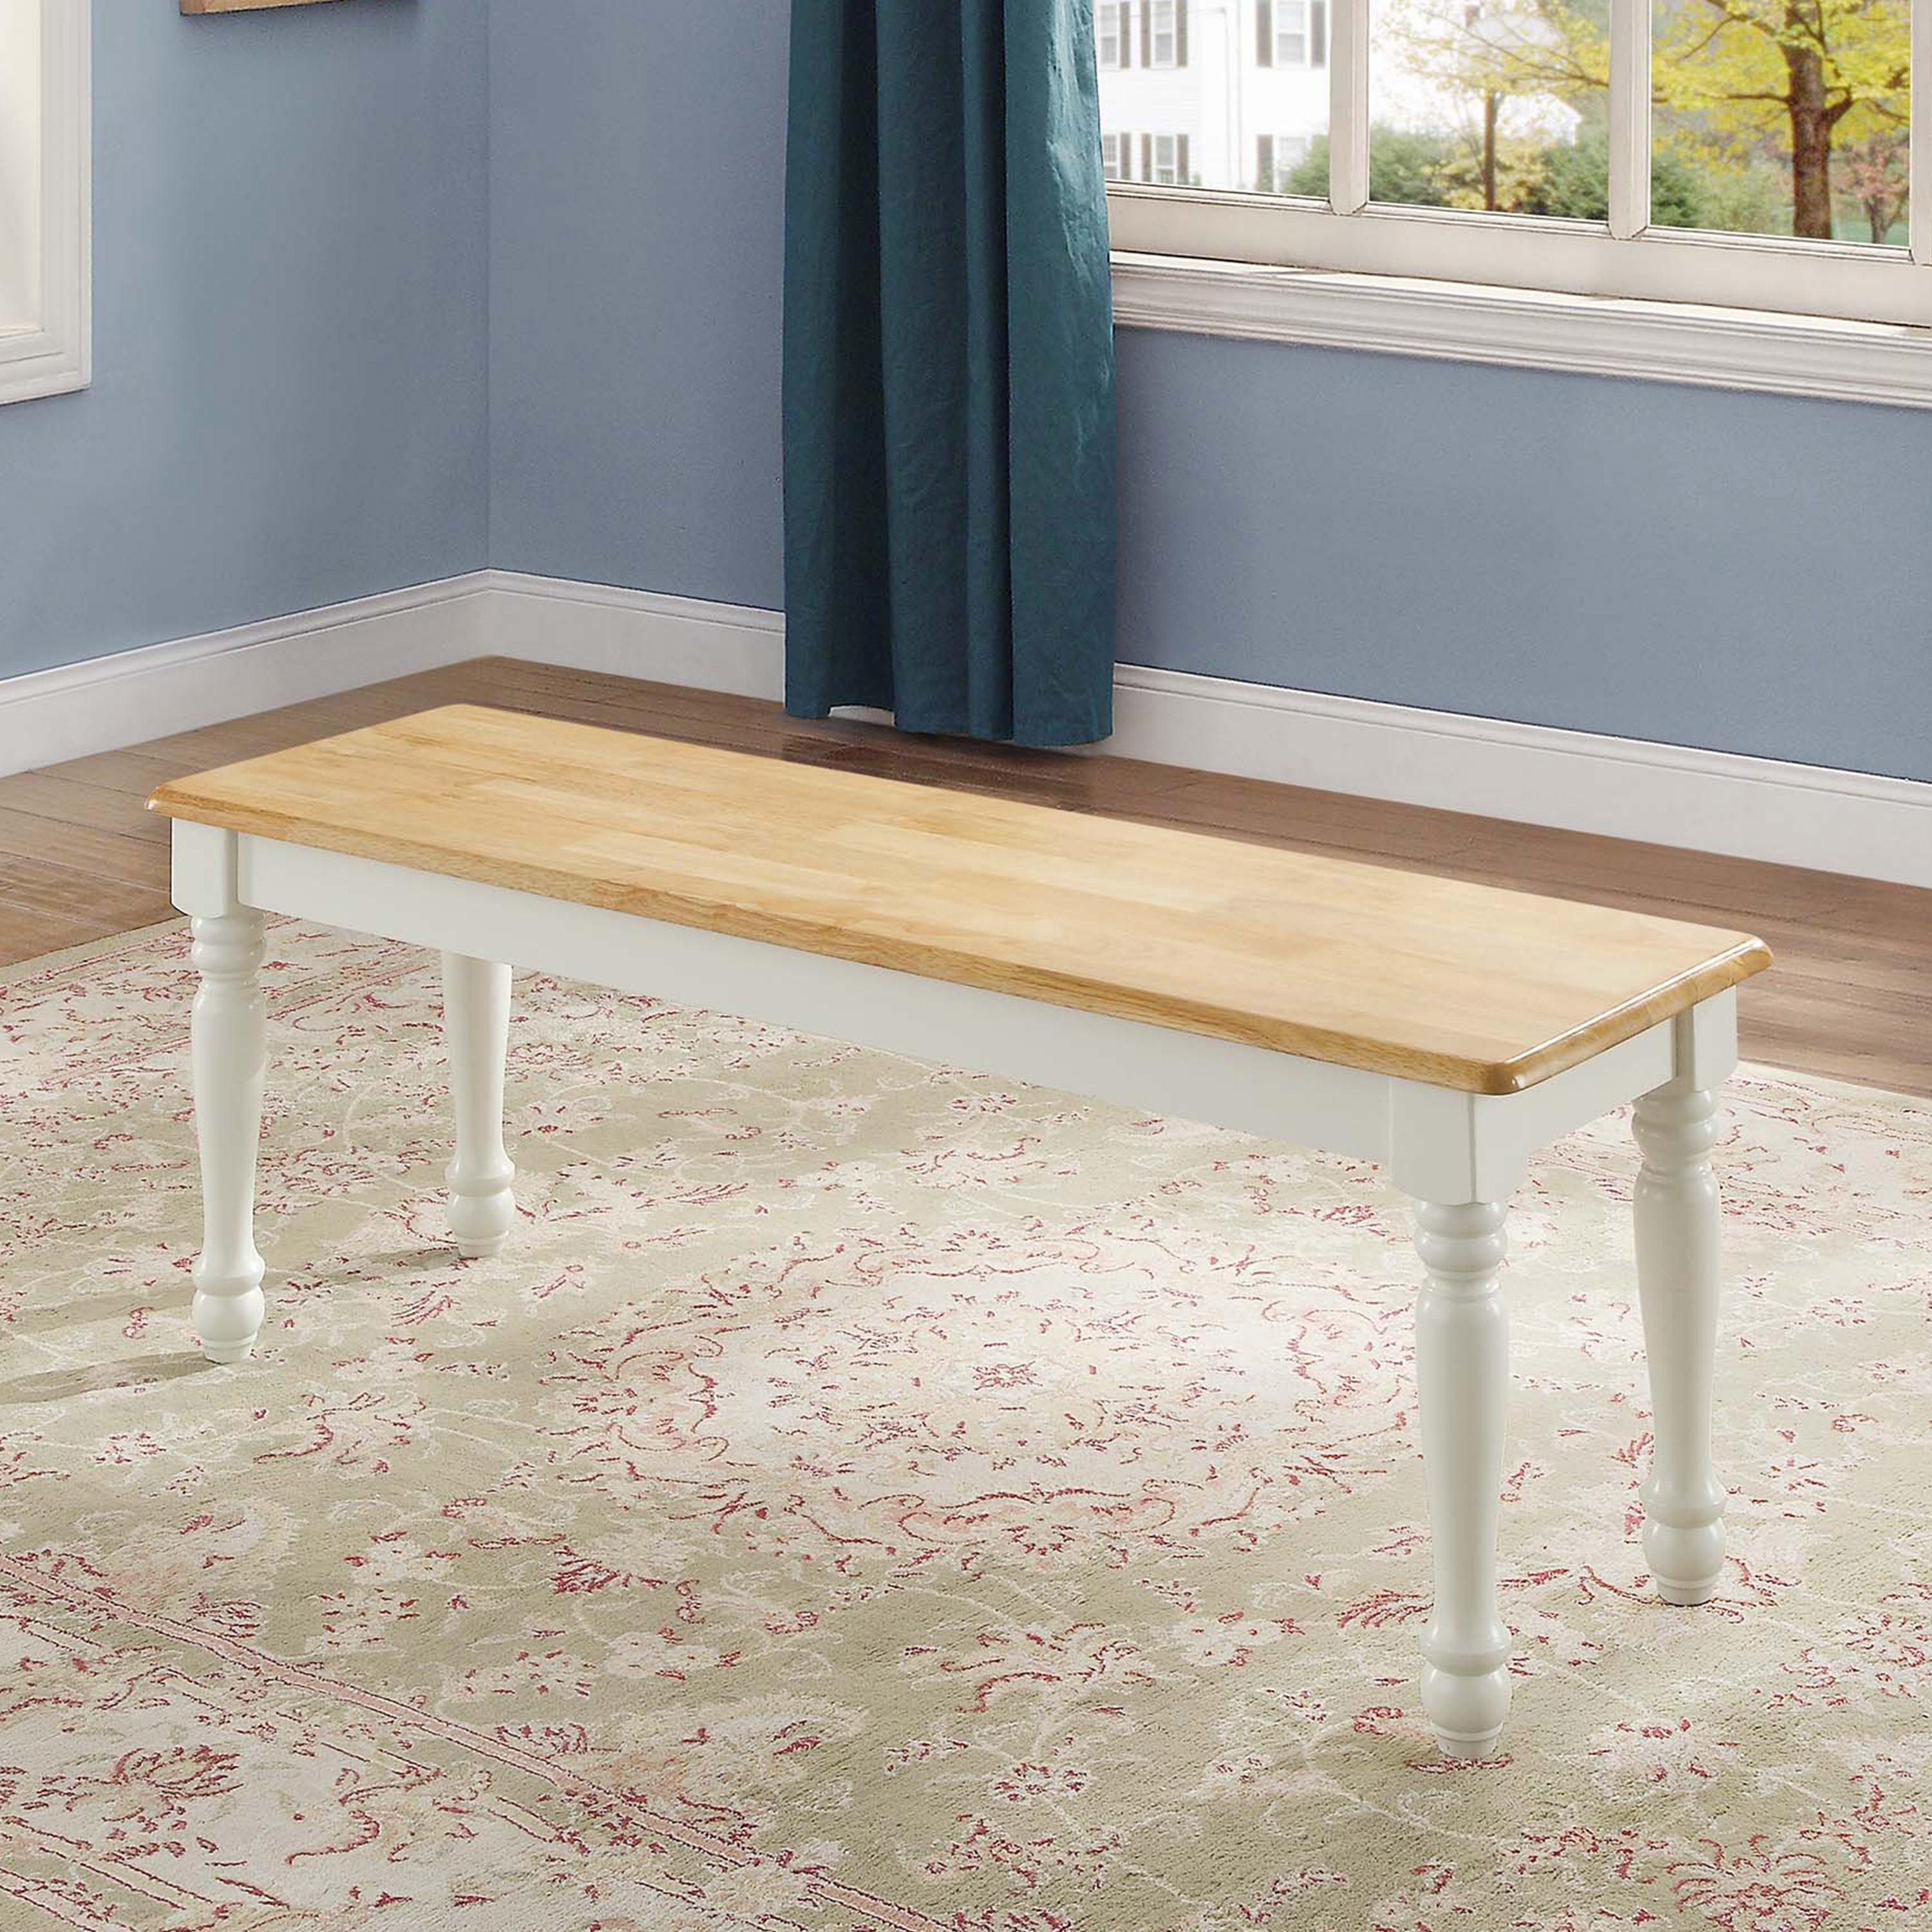 Better Homes & Gardens Autumn Lane Farmhouse Solid Wood Dining Bench, White and Natural Finish - image 5 of 6